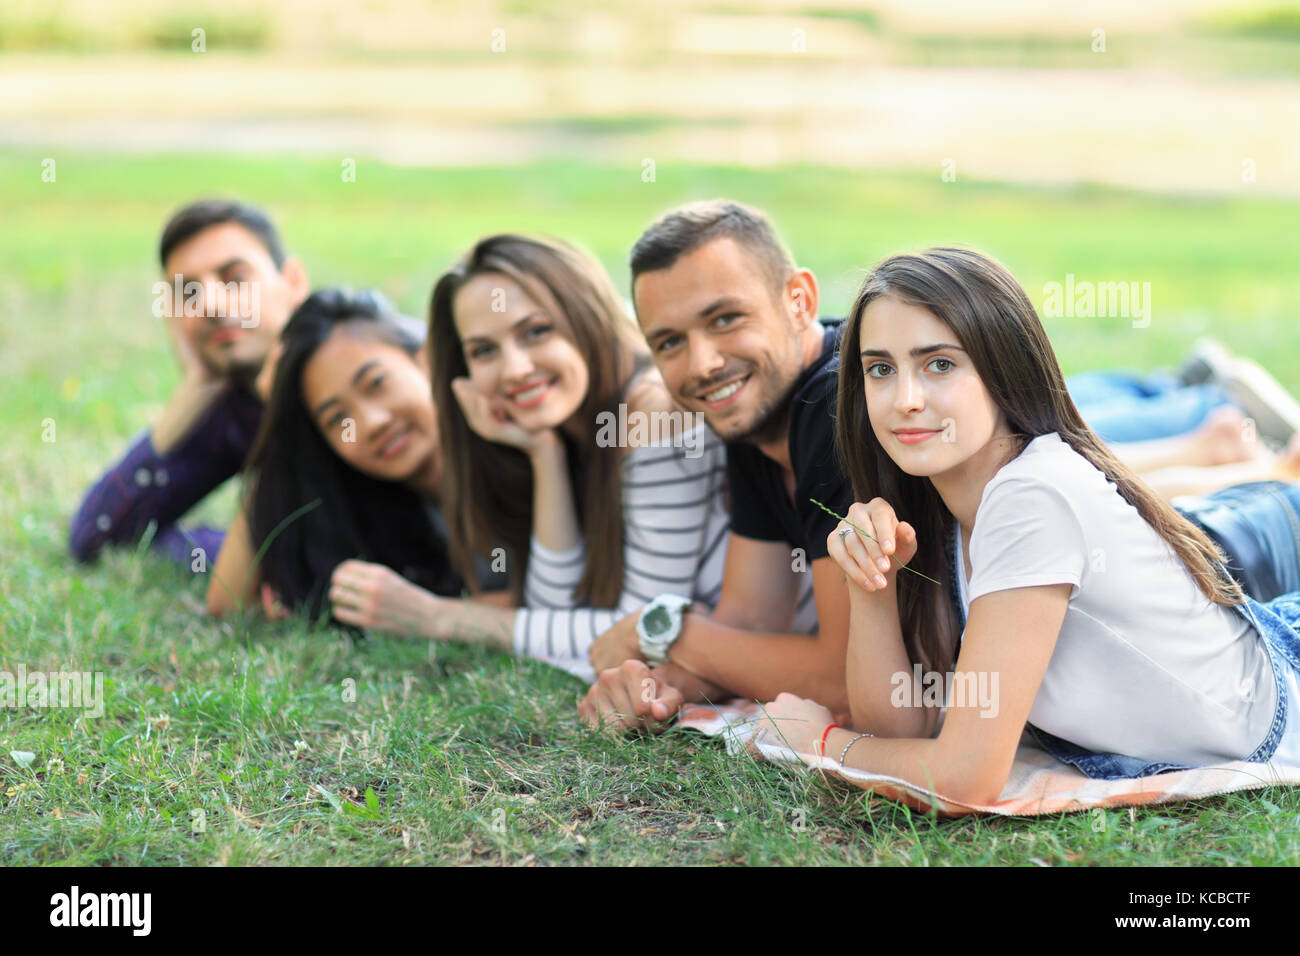 Group of five friends lying in row in park. Smiling young people with different ethnicity having fun outdoors. Focus on woman. Carefree students leisu Stock Photo